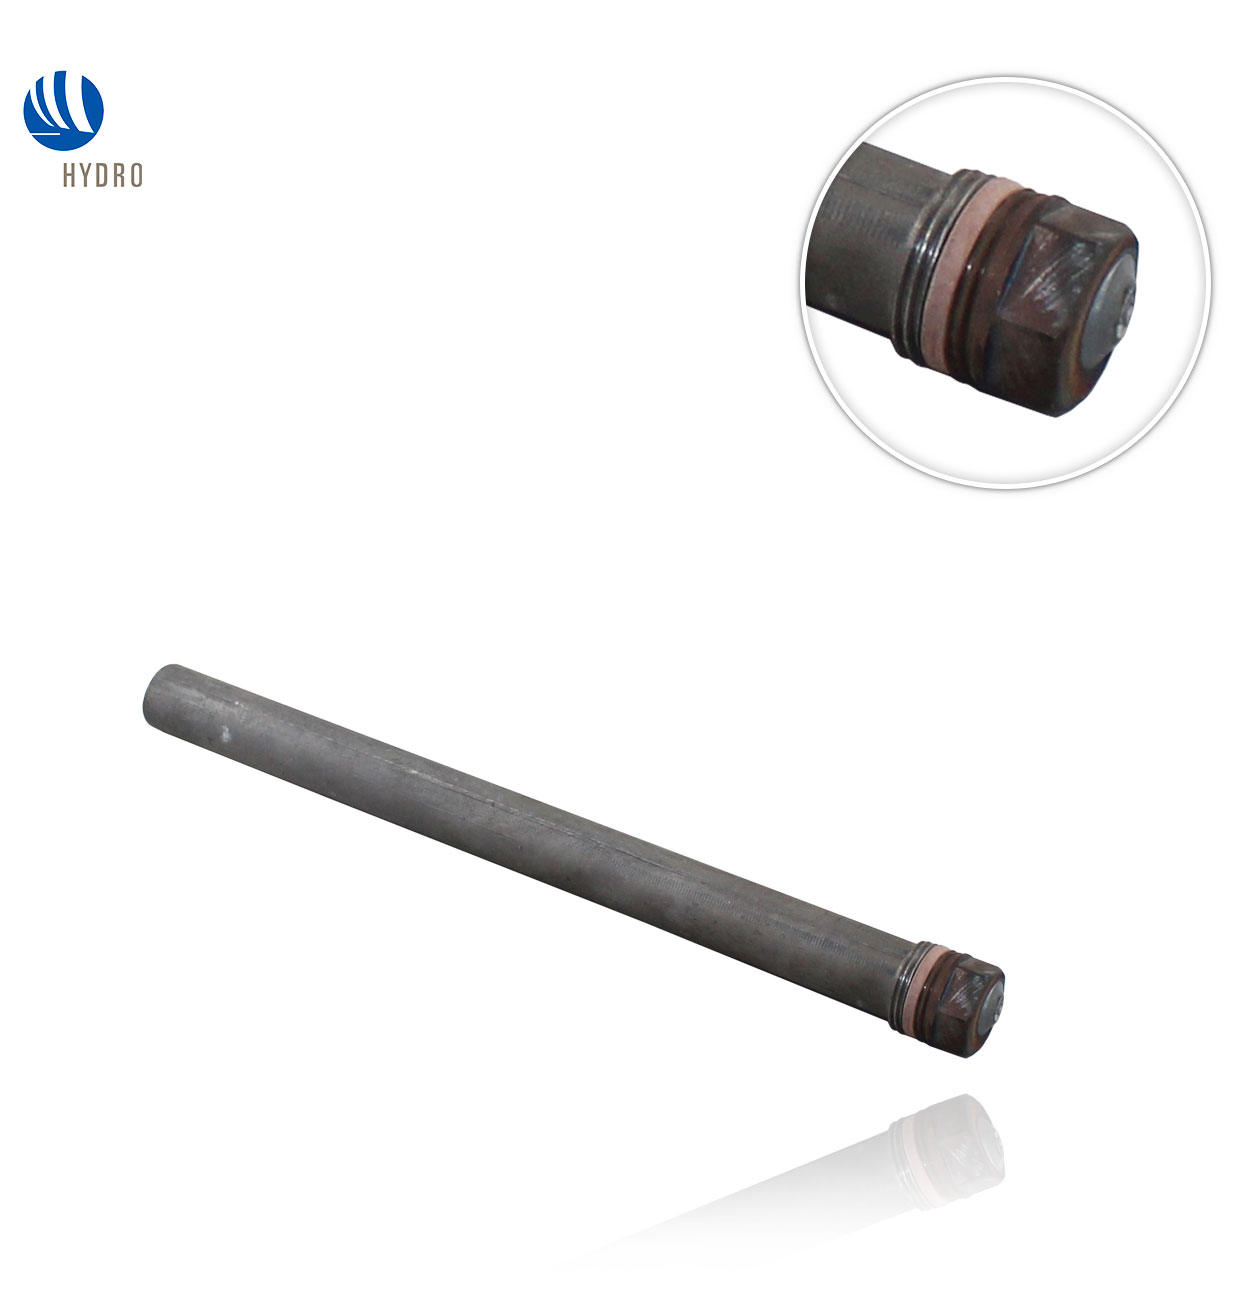 22x280 G3/4 VAILLANT MAGNESIUM ANODE WITH PTFE